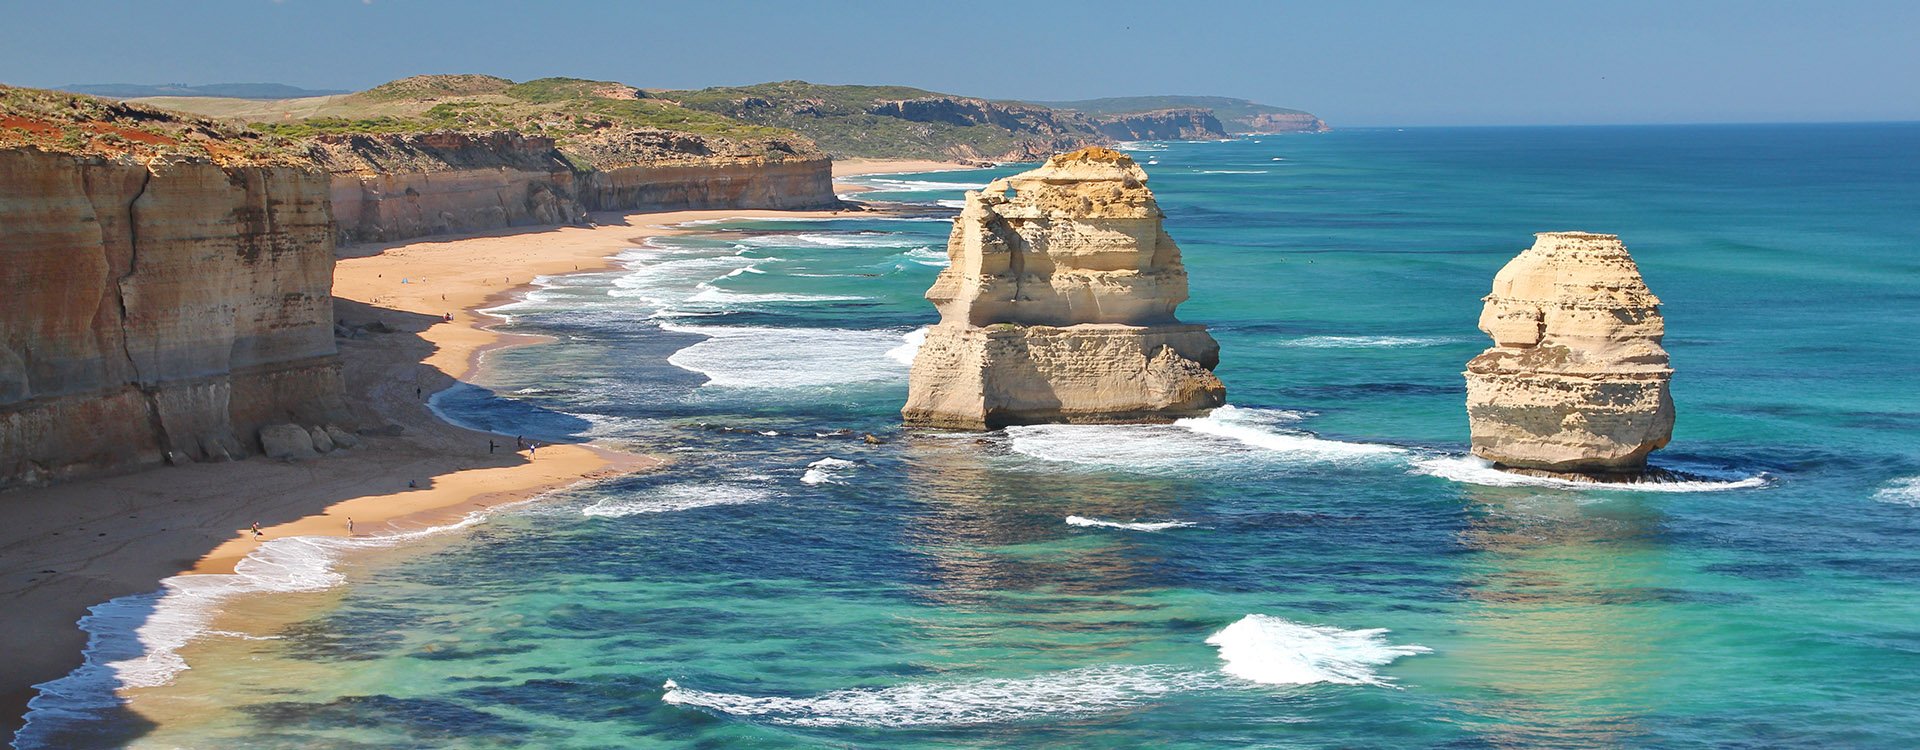 The Twelve Apostles, limestone collection along the shores of Port Campbell National Park, Victoria, Australia